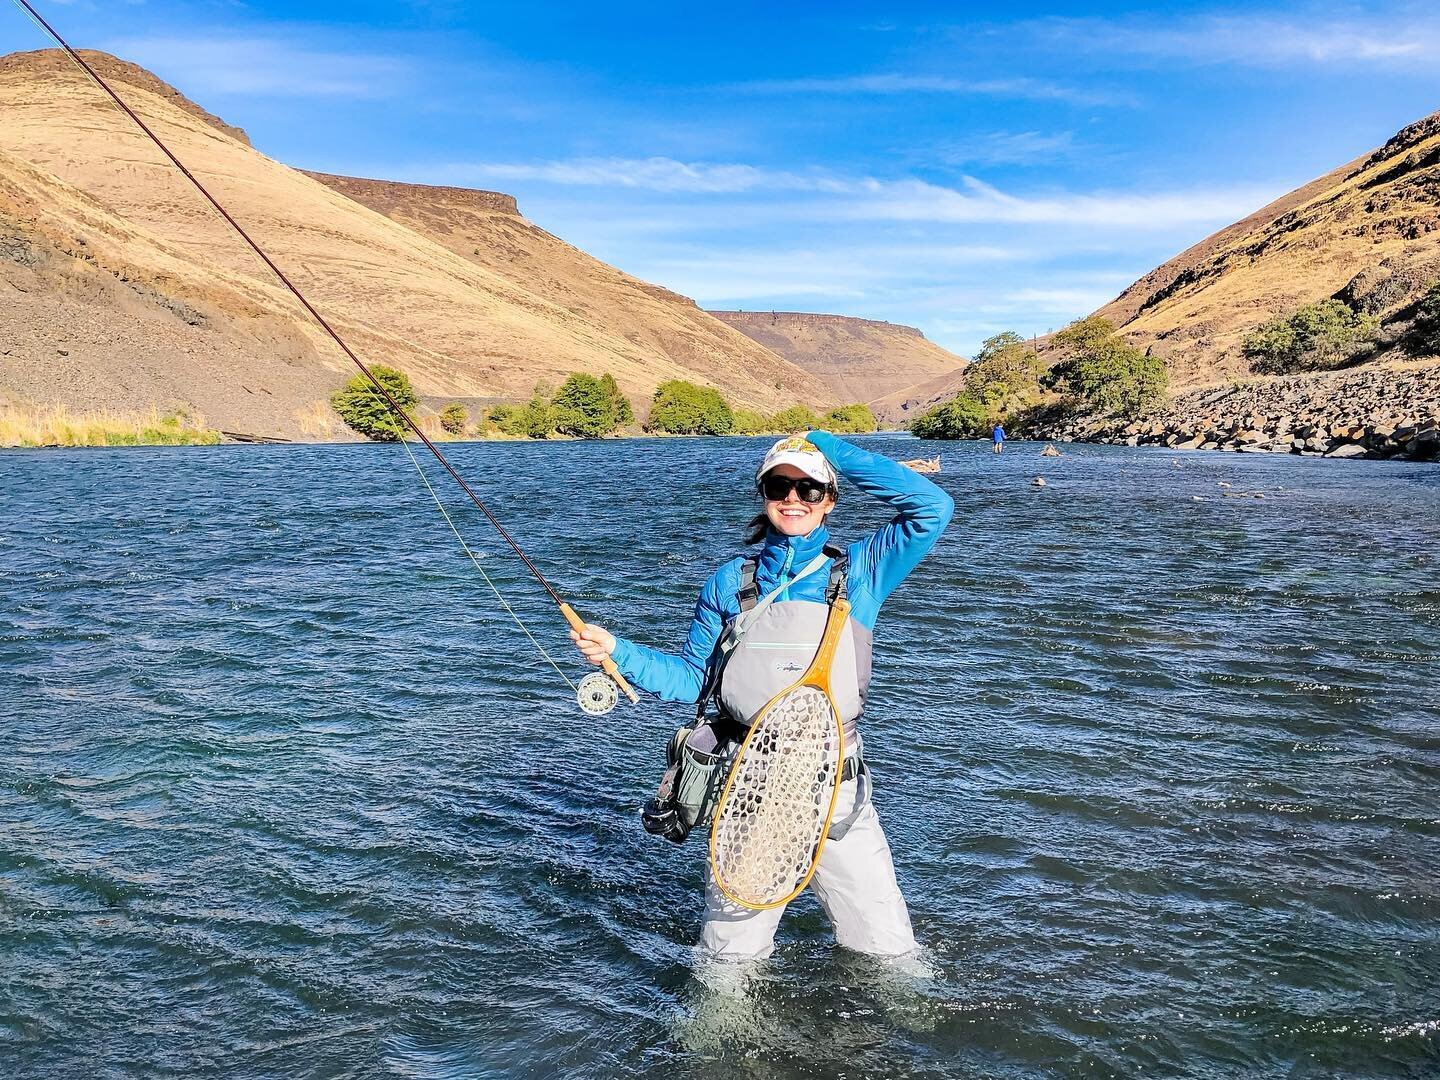 When the wind is so strong it almost takes your hat off- all you can do is laugh and cast between the gusts 😂

#snowsoutwest #flyfishing #troutbum #onthefly #exploreoregon #highdesert #forceofnature #deschutesriver